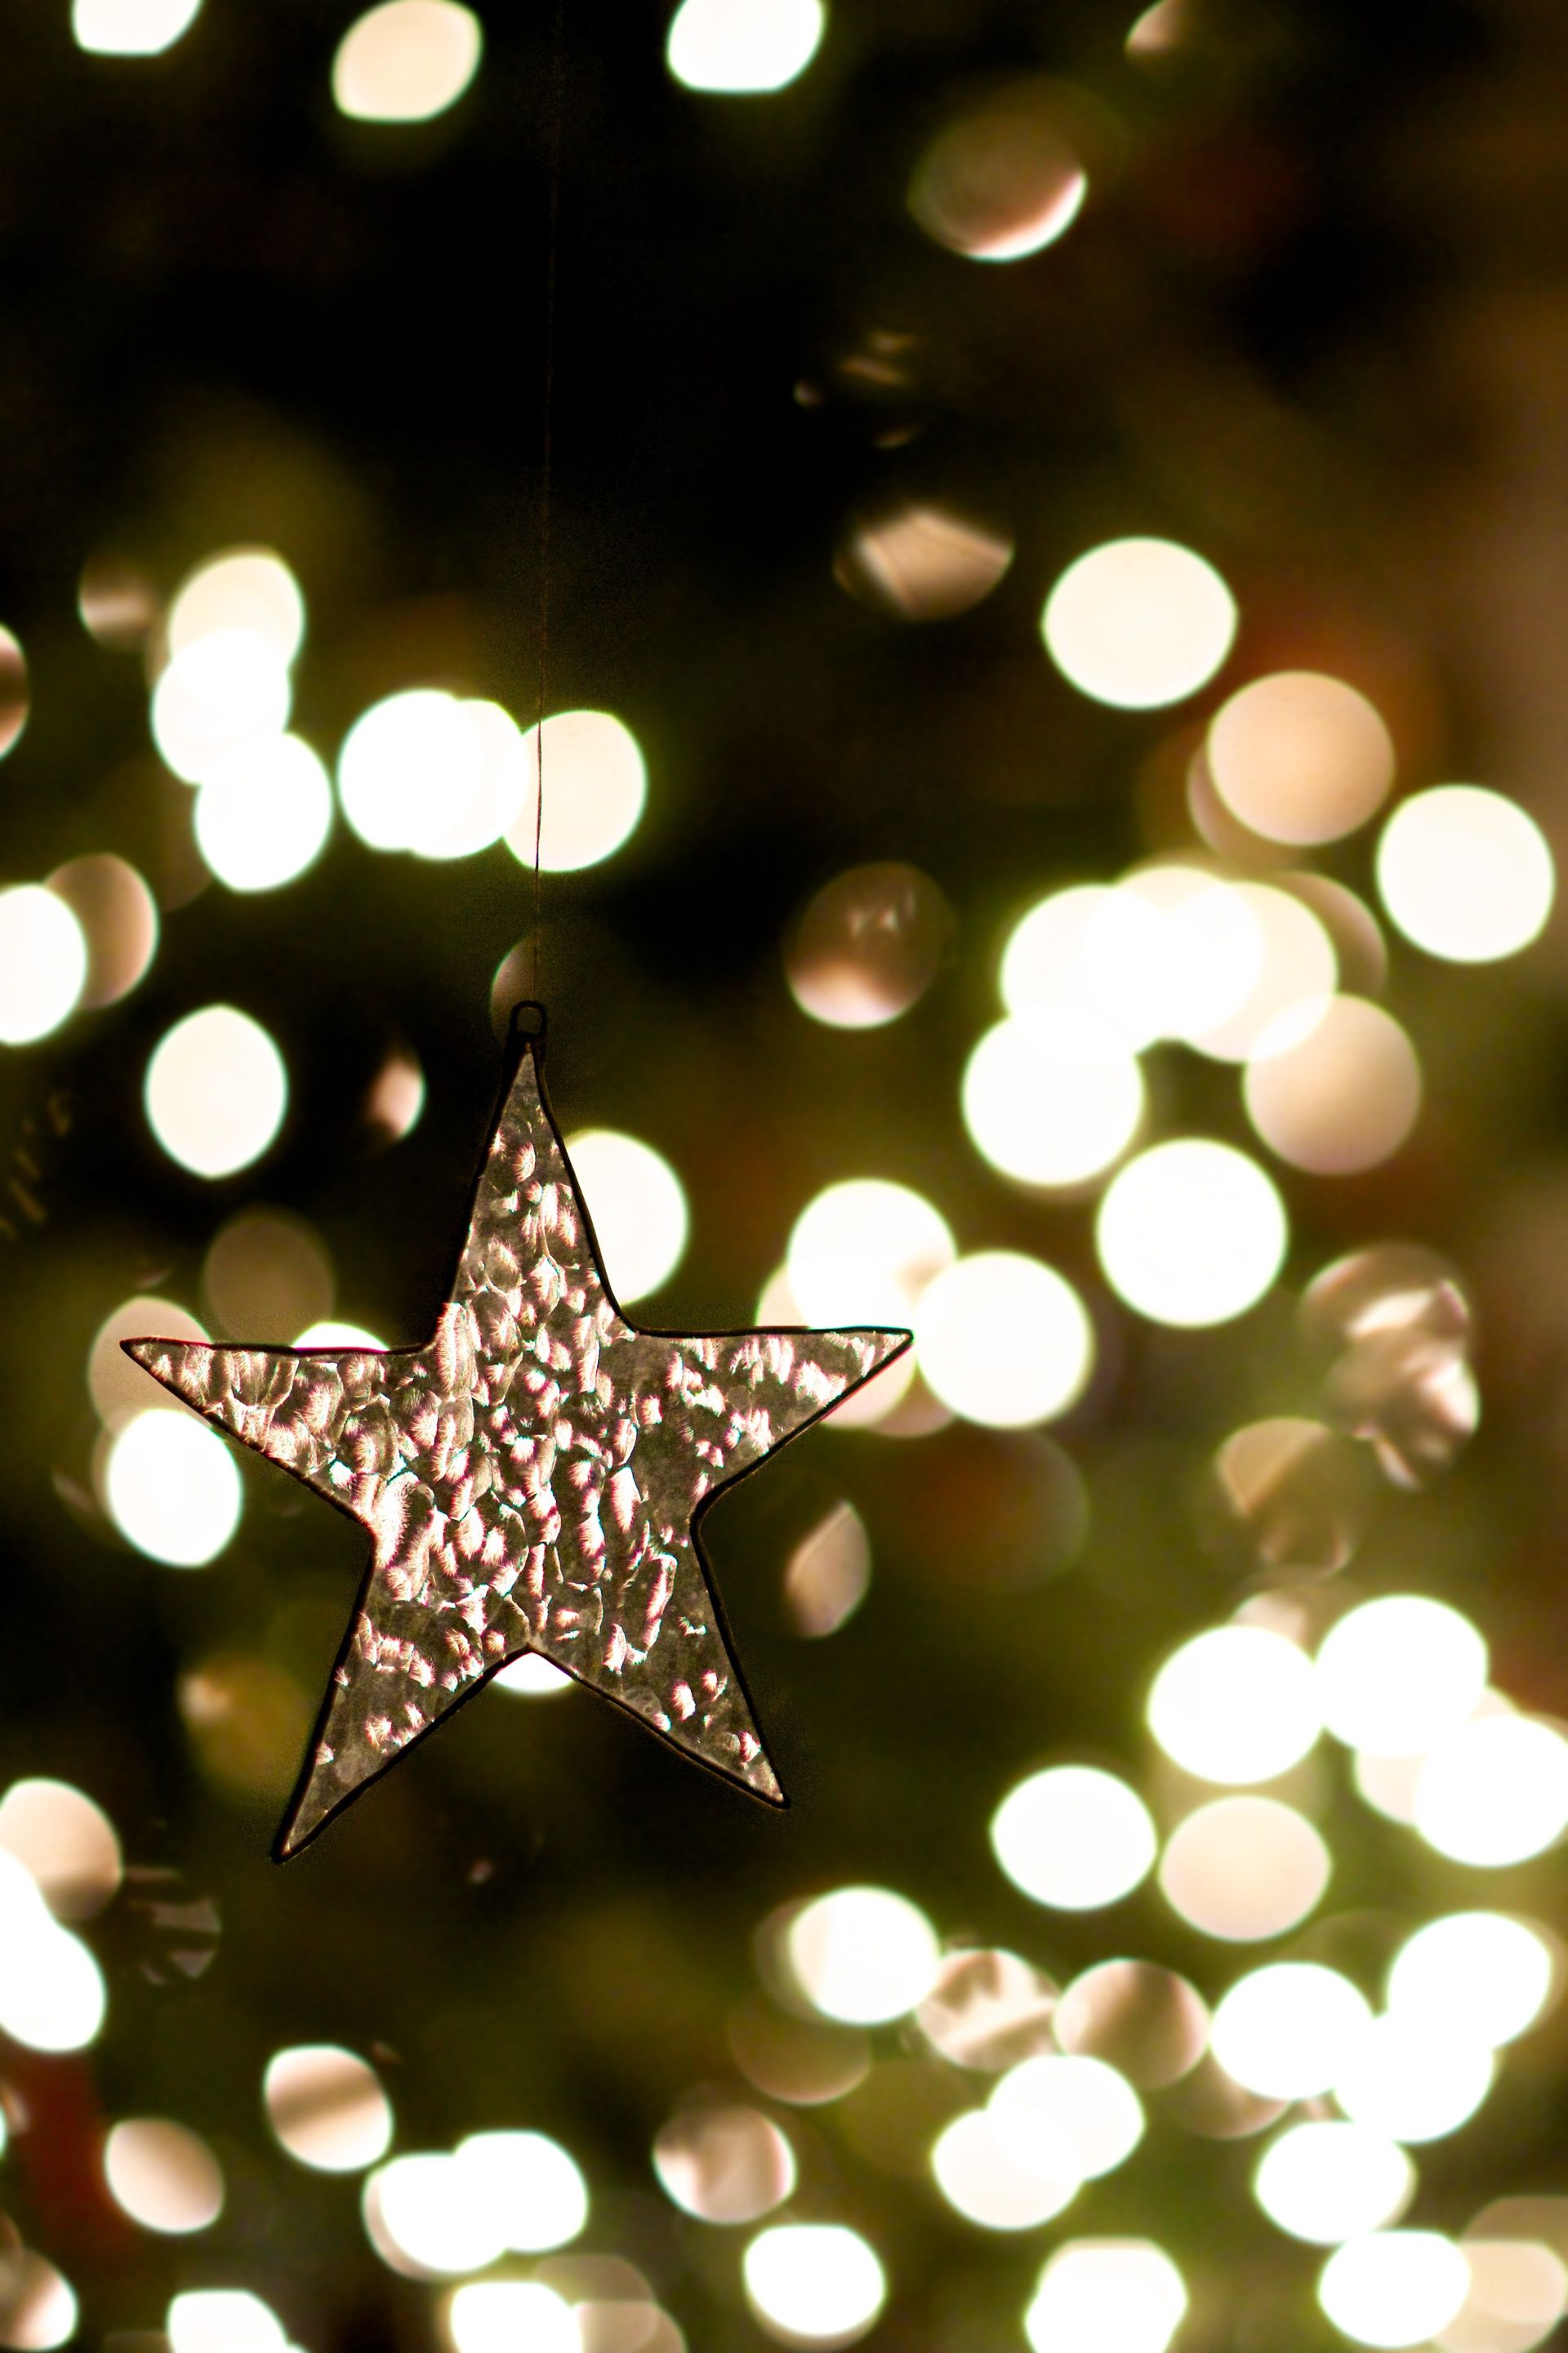 A small glass star ornament hanging from a Christmas tree.